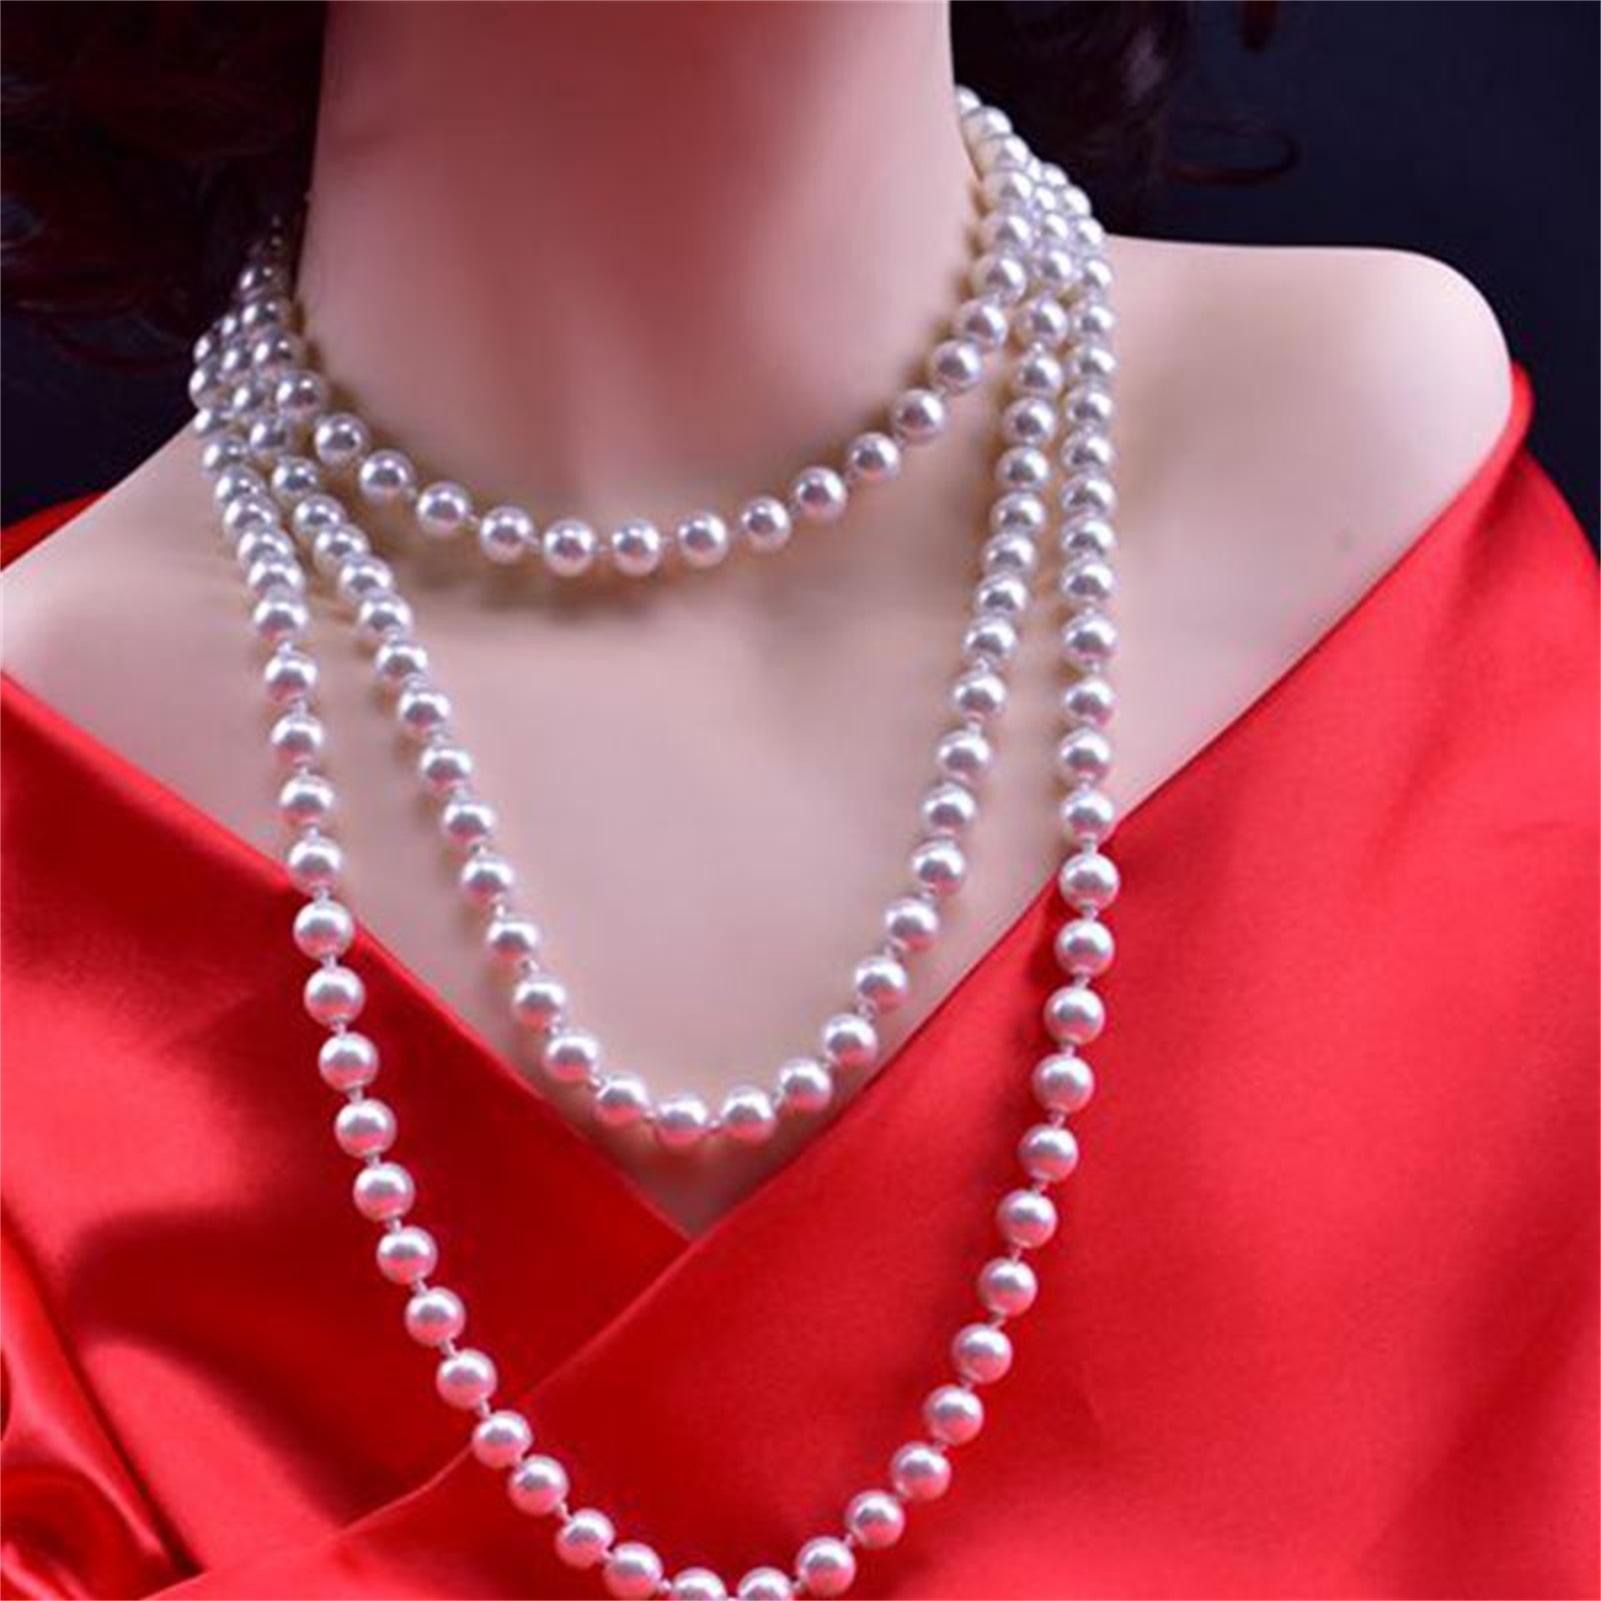 Meidiya 150cm Fashion Knot Simulated Pearl Necklace Tassel Multi-layer Long Chain Necklace Female Fashion Sweater Dress Accessories - image 4 of 8